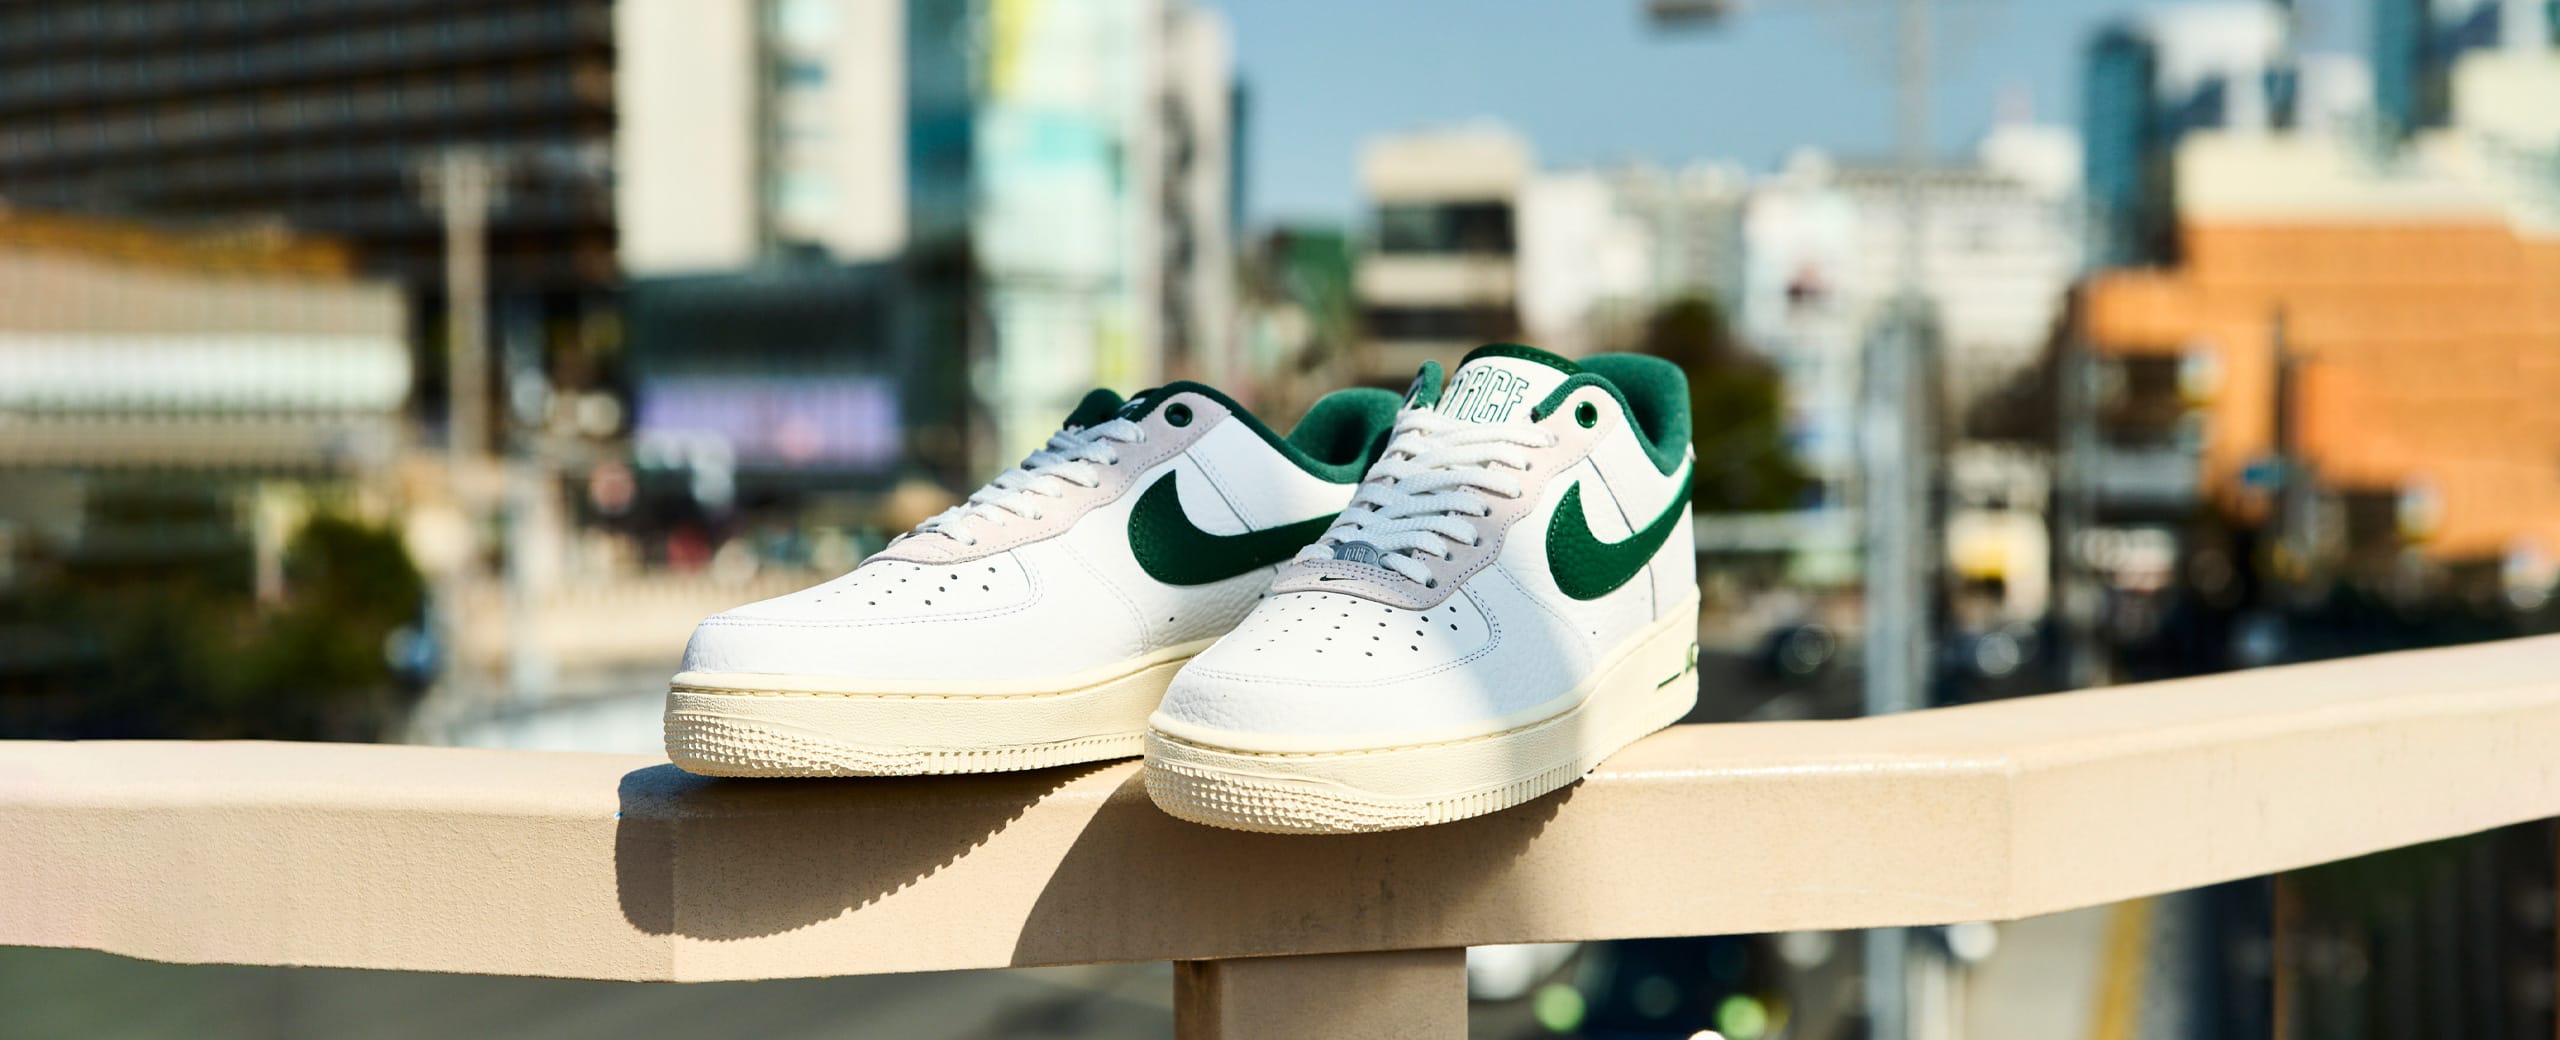 NIKE WMNS AIR FORCE 1 '07 LX COMMAND FORCE "Gorge Green"